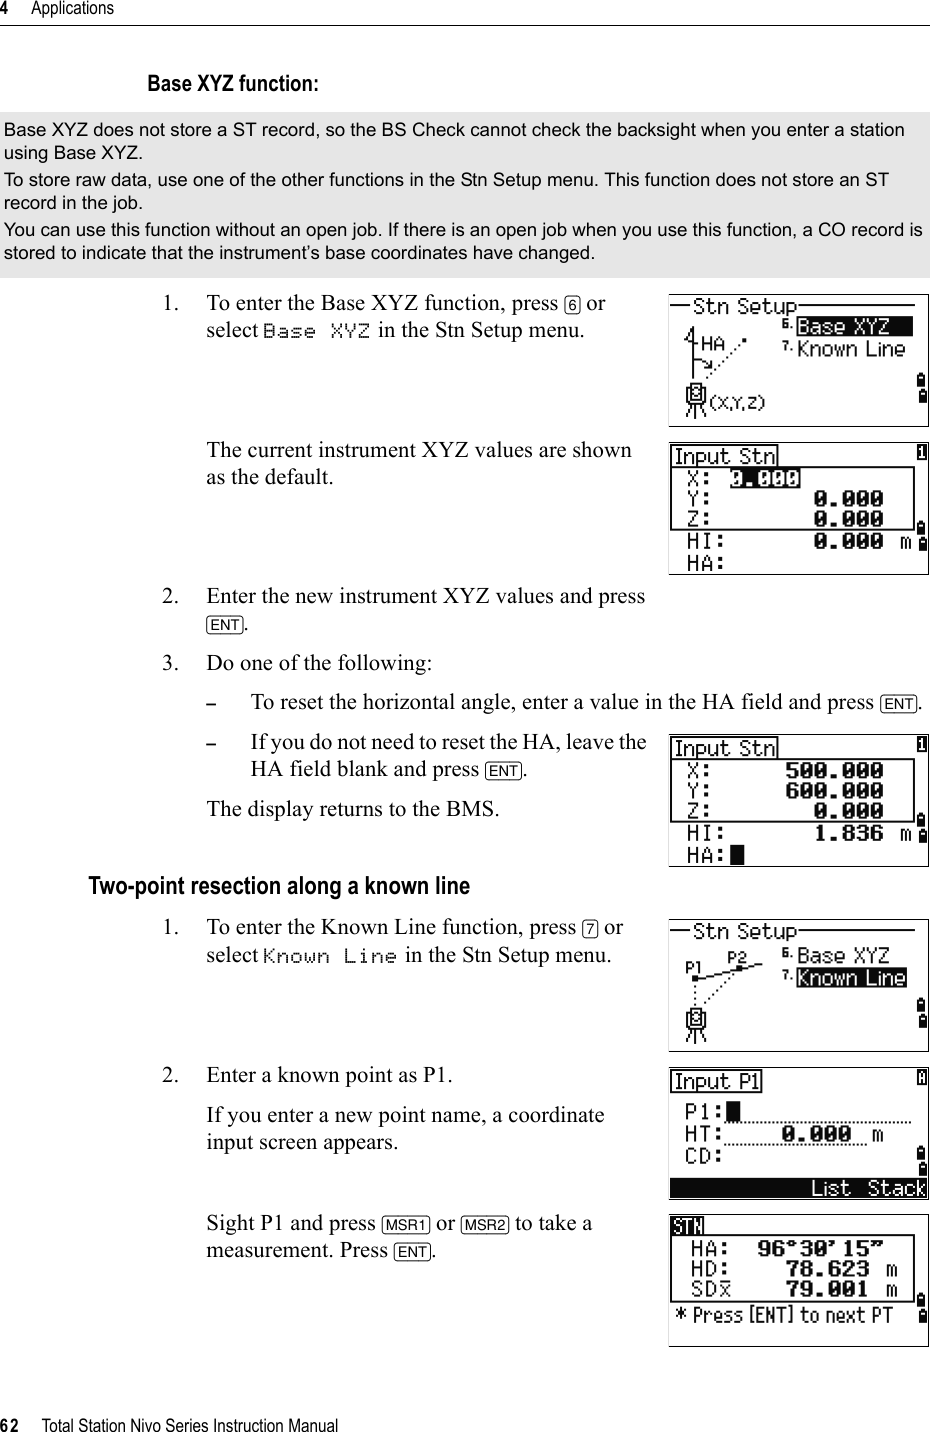 4     Applications62     Total Station Nivo Series Instruction ManualBase XYZ function:1. To enter the Base XYZ function, press [6] or select Base XYZ in the Stn Setup menu.The current instrument XYZ values are shown as the default.2. Enter the new instrument XYZ values and press [ENT].3. Do one of the following:–To reset the horizontal angle, enter a value in the HA field and press [ENT].–If you do not need to reset the HA, leave the HA field blank and press [ENT].The display returns to the BMS.Two-point resection along a known line1. To enter the Known Line function, press [7] or select Known Line in the Stn Setup menu.2. Enter a known point as P1.If you enter a new point name, a coordinate input screen appears.Sight P1 and press [MSR1] or [MSR2] to take a measurement. Press [ENT].Base XYZ does not store a ST record, so the BS Check cannot check the backsight when you enter a station using Base XYZ.To store raw data, use one of the other functions in the Stn Setup menu. This function does not store an ST record in the job.You can use this function without an open job. If there is an open job when you use this function, a CO record is stored to indicate that the instrument’s base coordinates have changed.